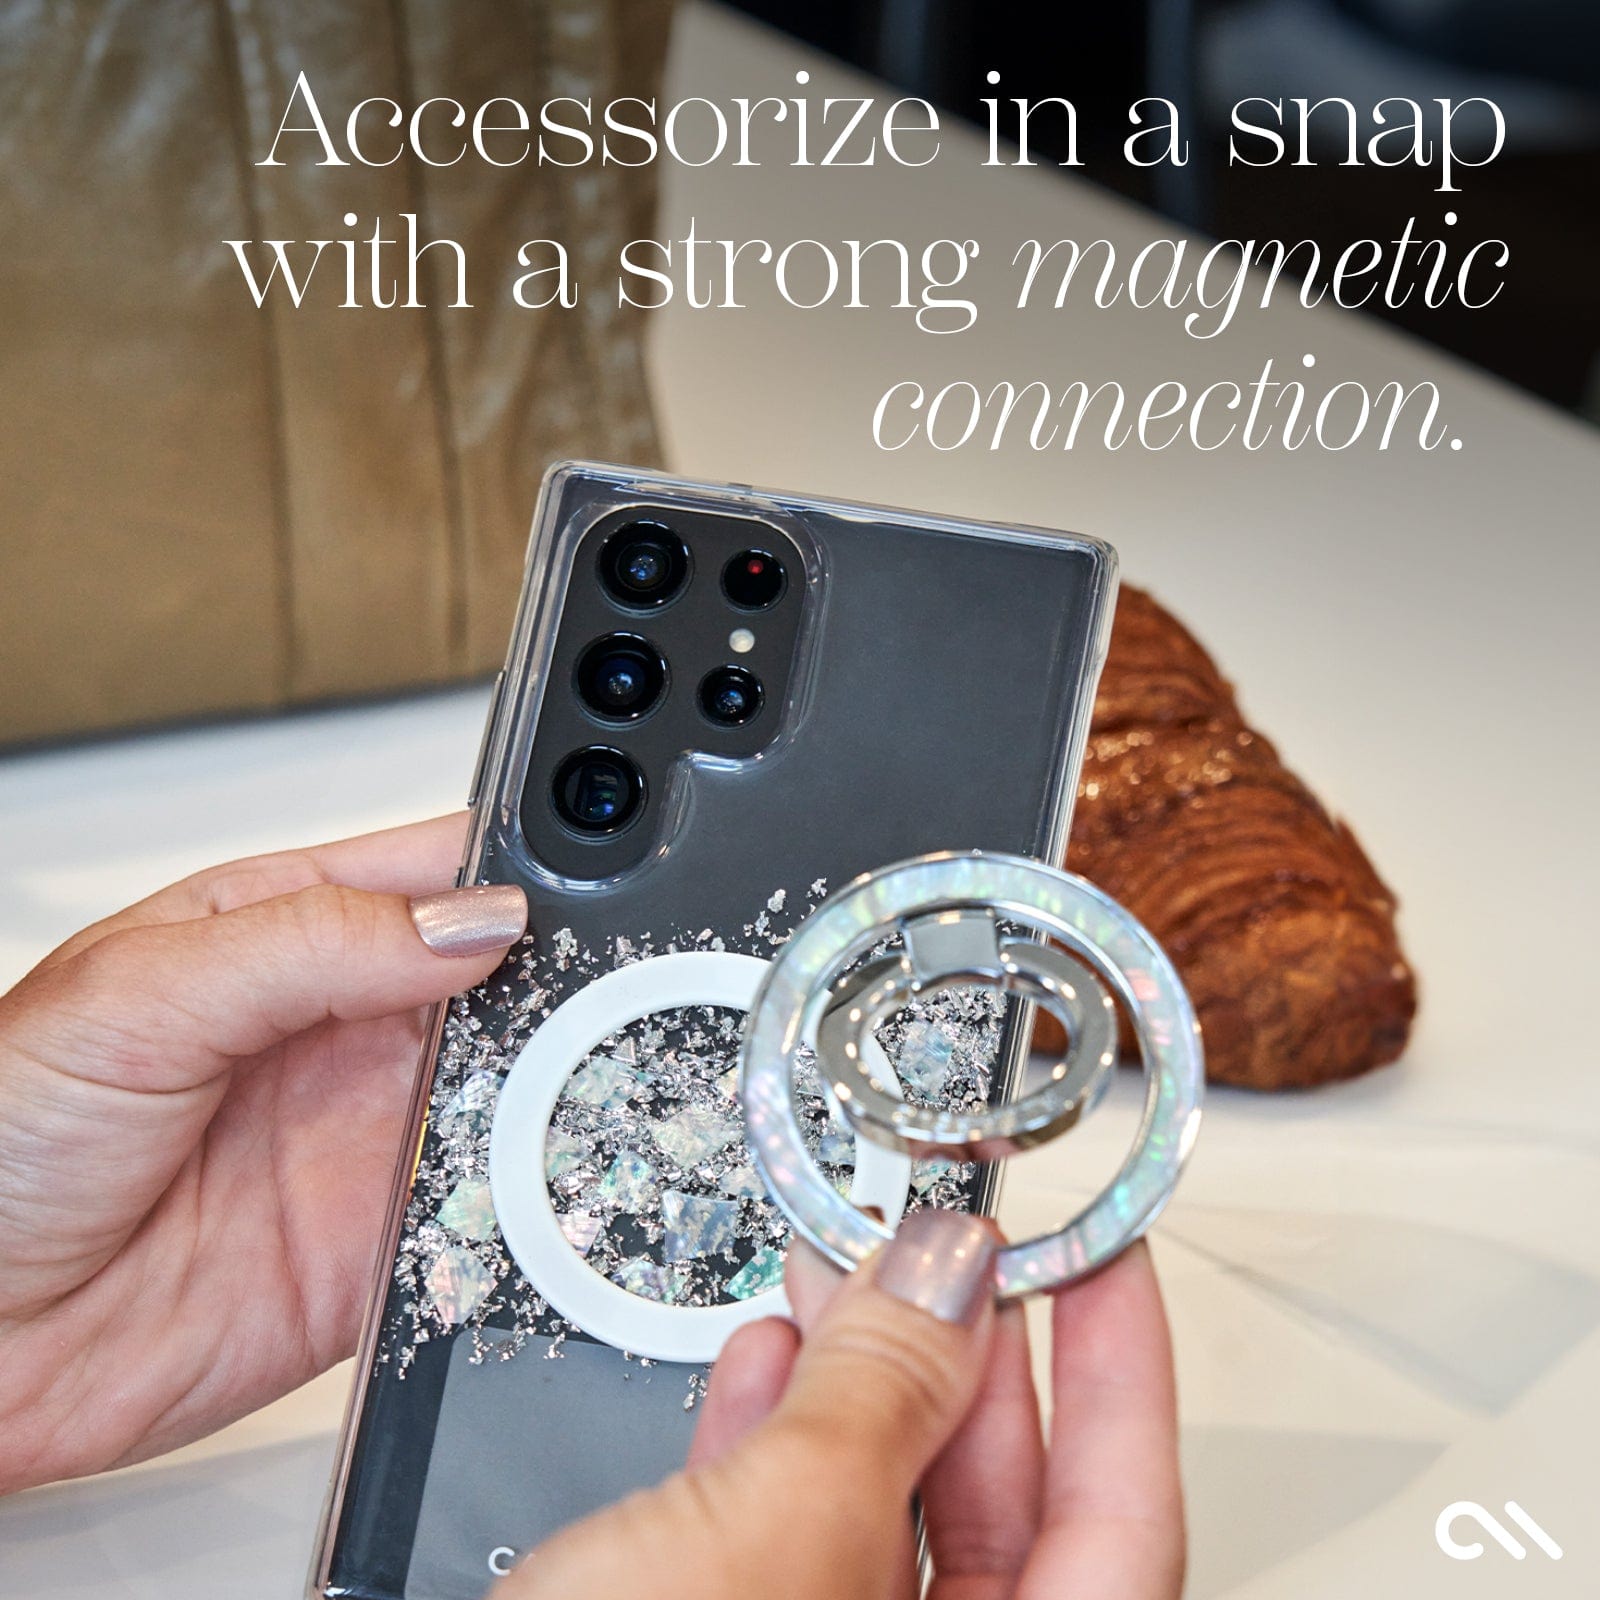 ACCESSORIZE IN A SNAP WITH A STRONG MAGNETIC CONNECTION